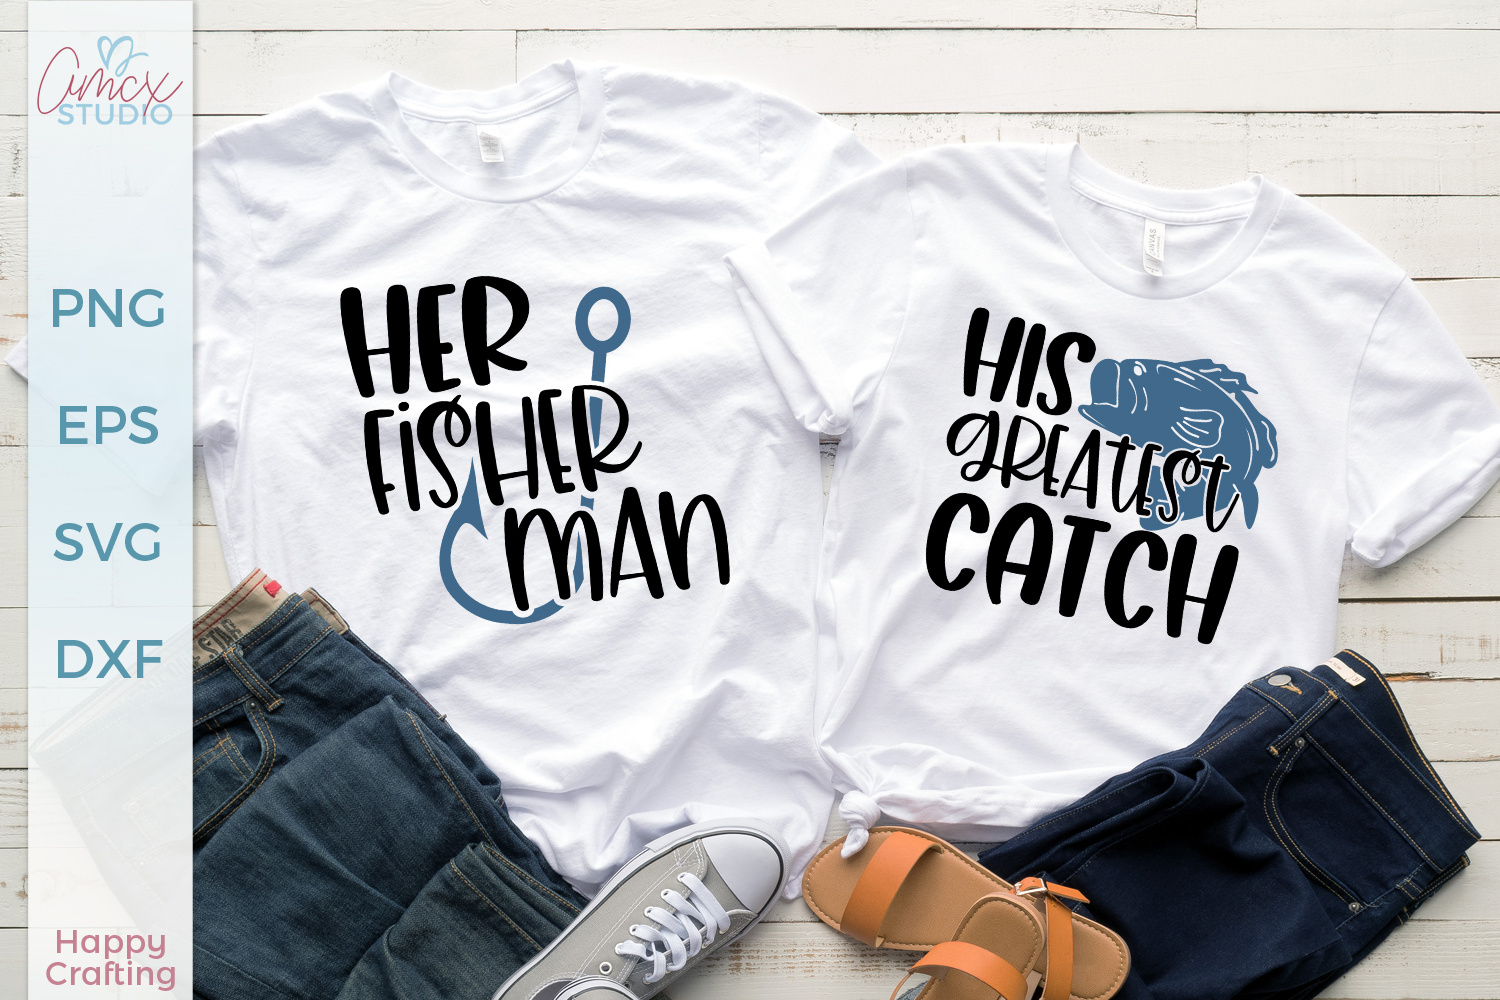 Download His and Her Fishing Shirts - Couples Shirts SVG Craft file